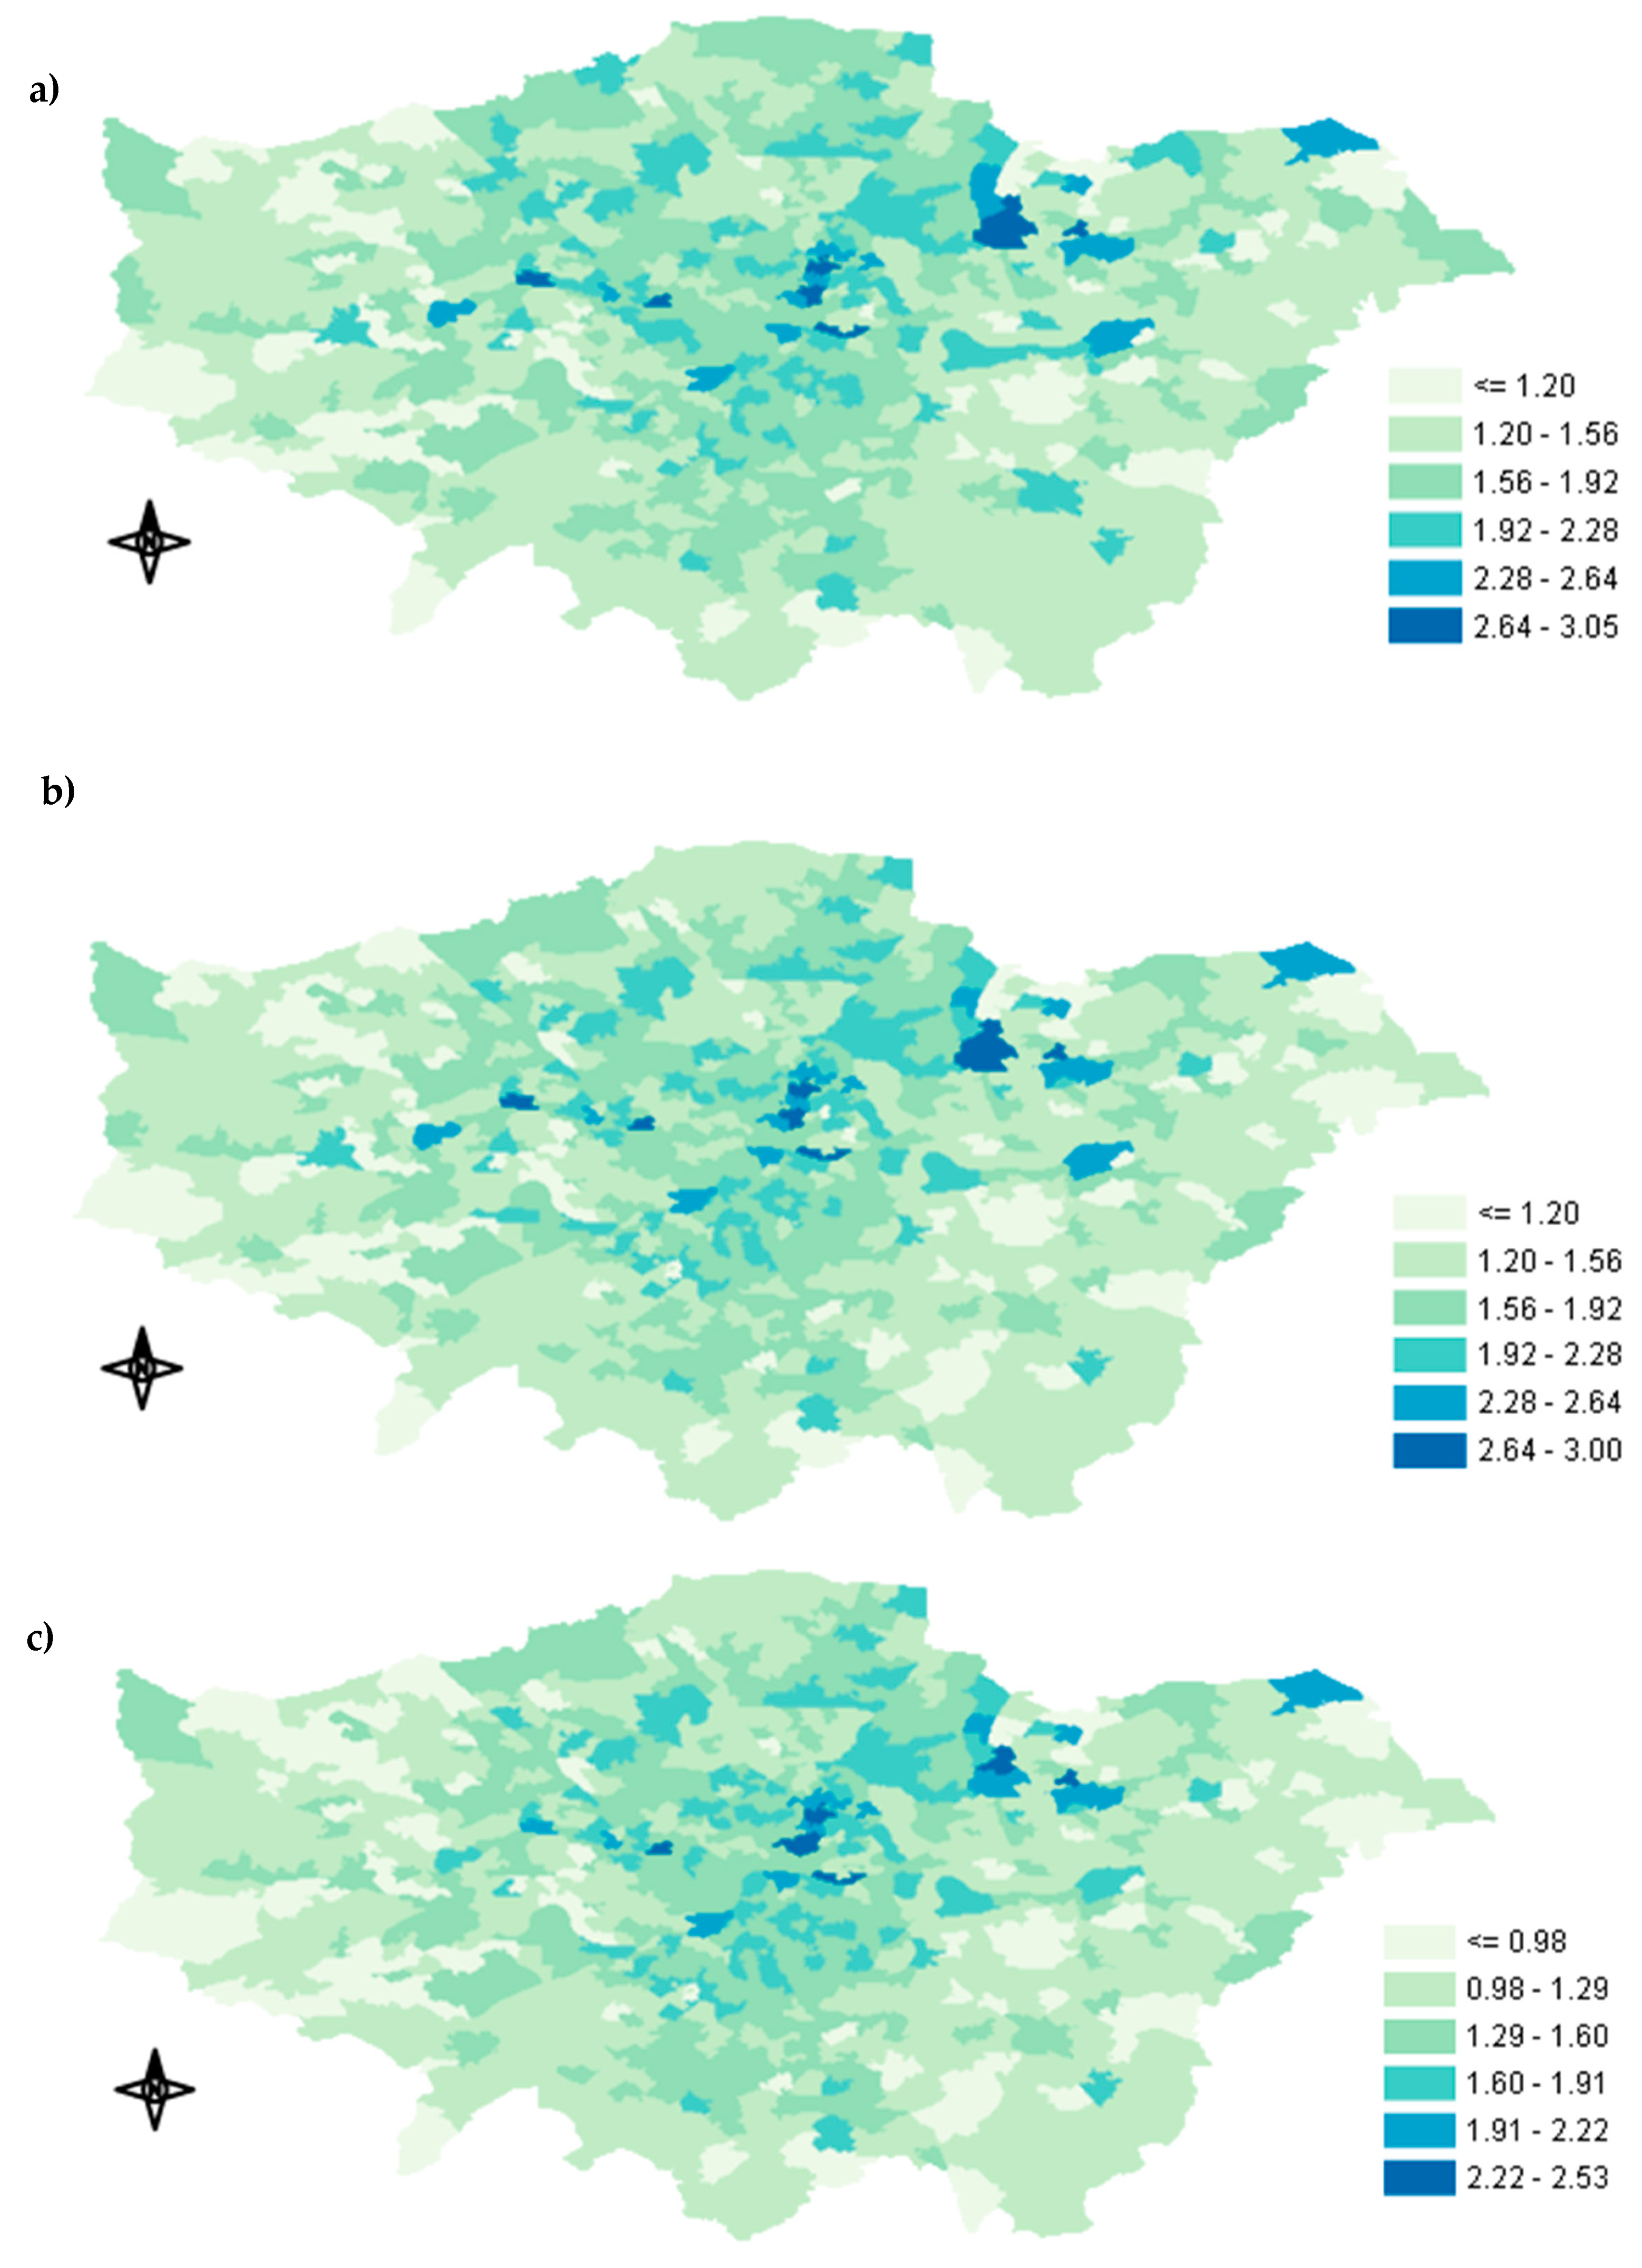 IJERPH | Free Full-Text | Quantifying the Health Burden Misclassification  from the Use of Different PM2.5 Exposure Tier Models: A Case Study of  London | HTML